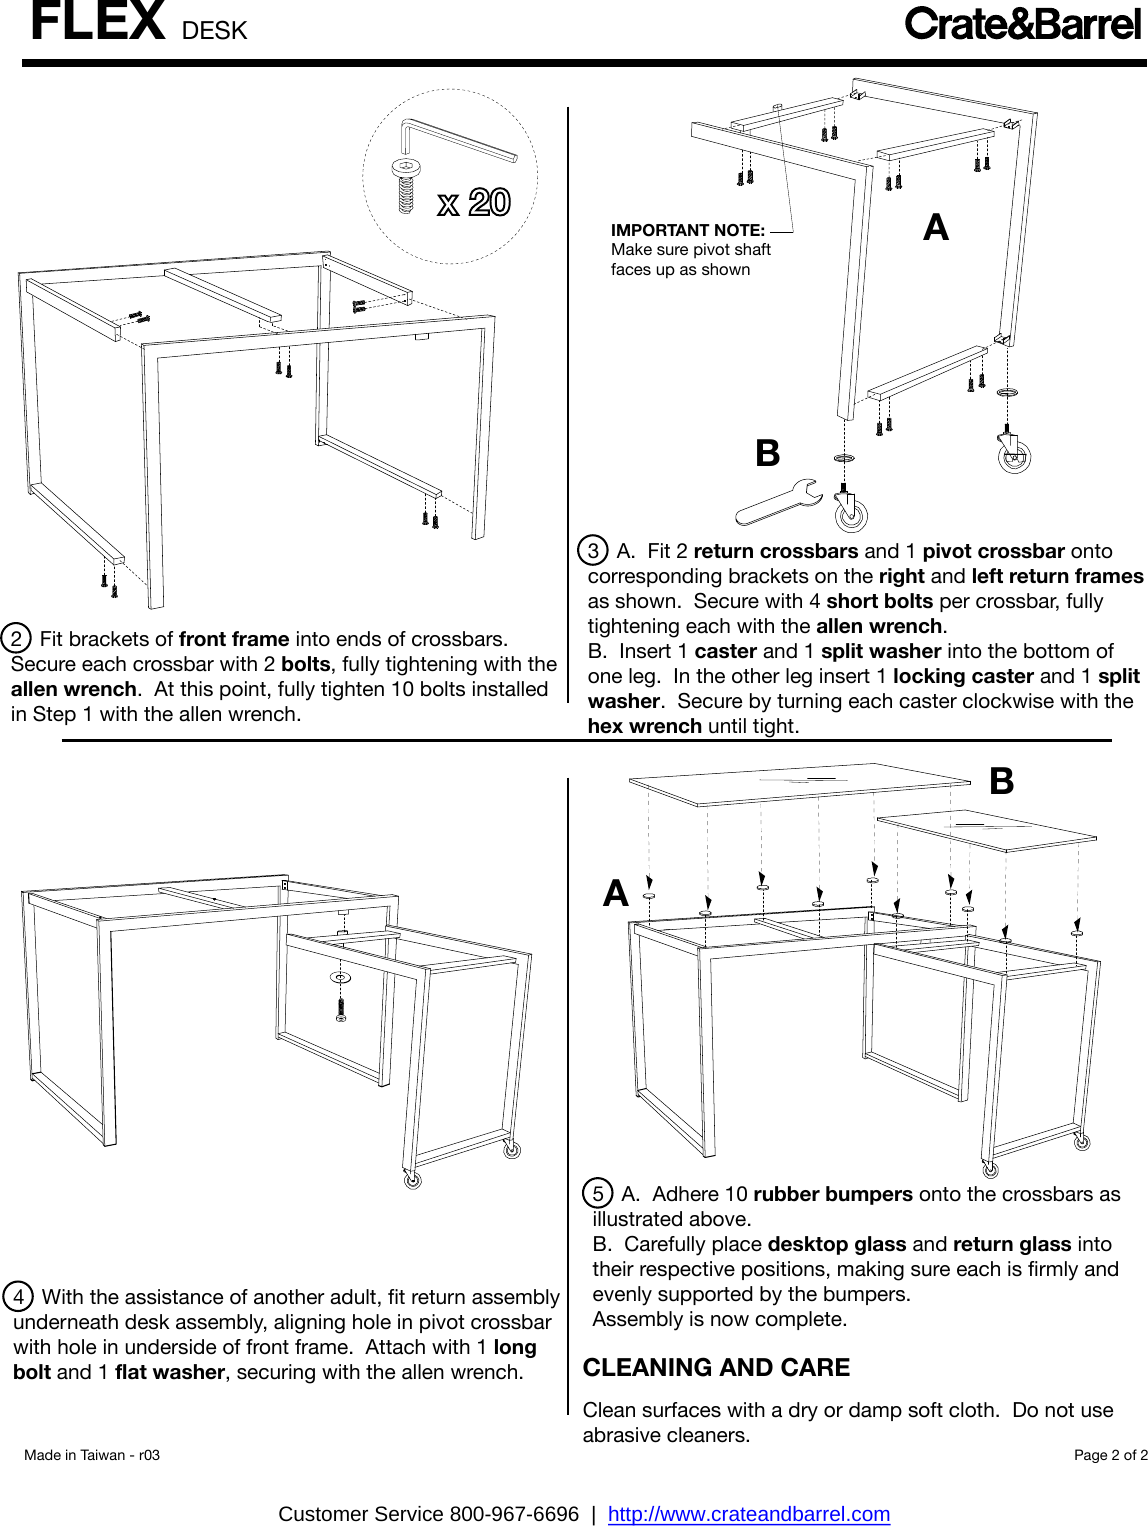 Page 2 of 2 - Crate-Barrel 475-Flex-Desk Flex Desk Assembly Instructions From Crate And Barrel